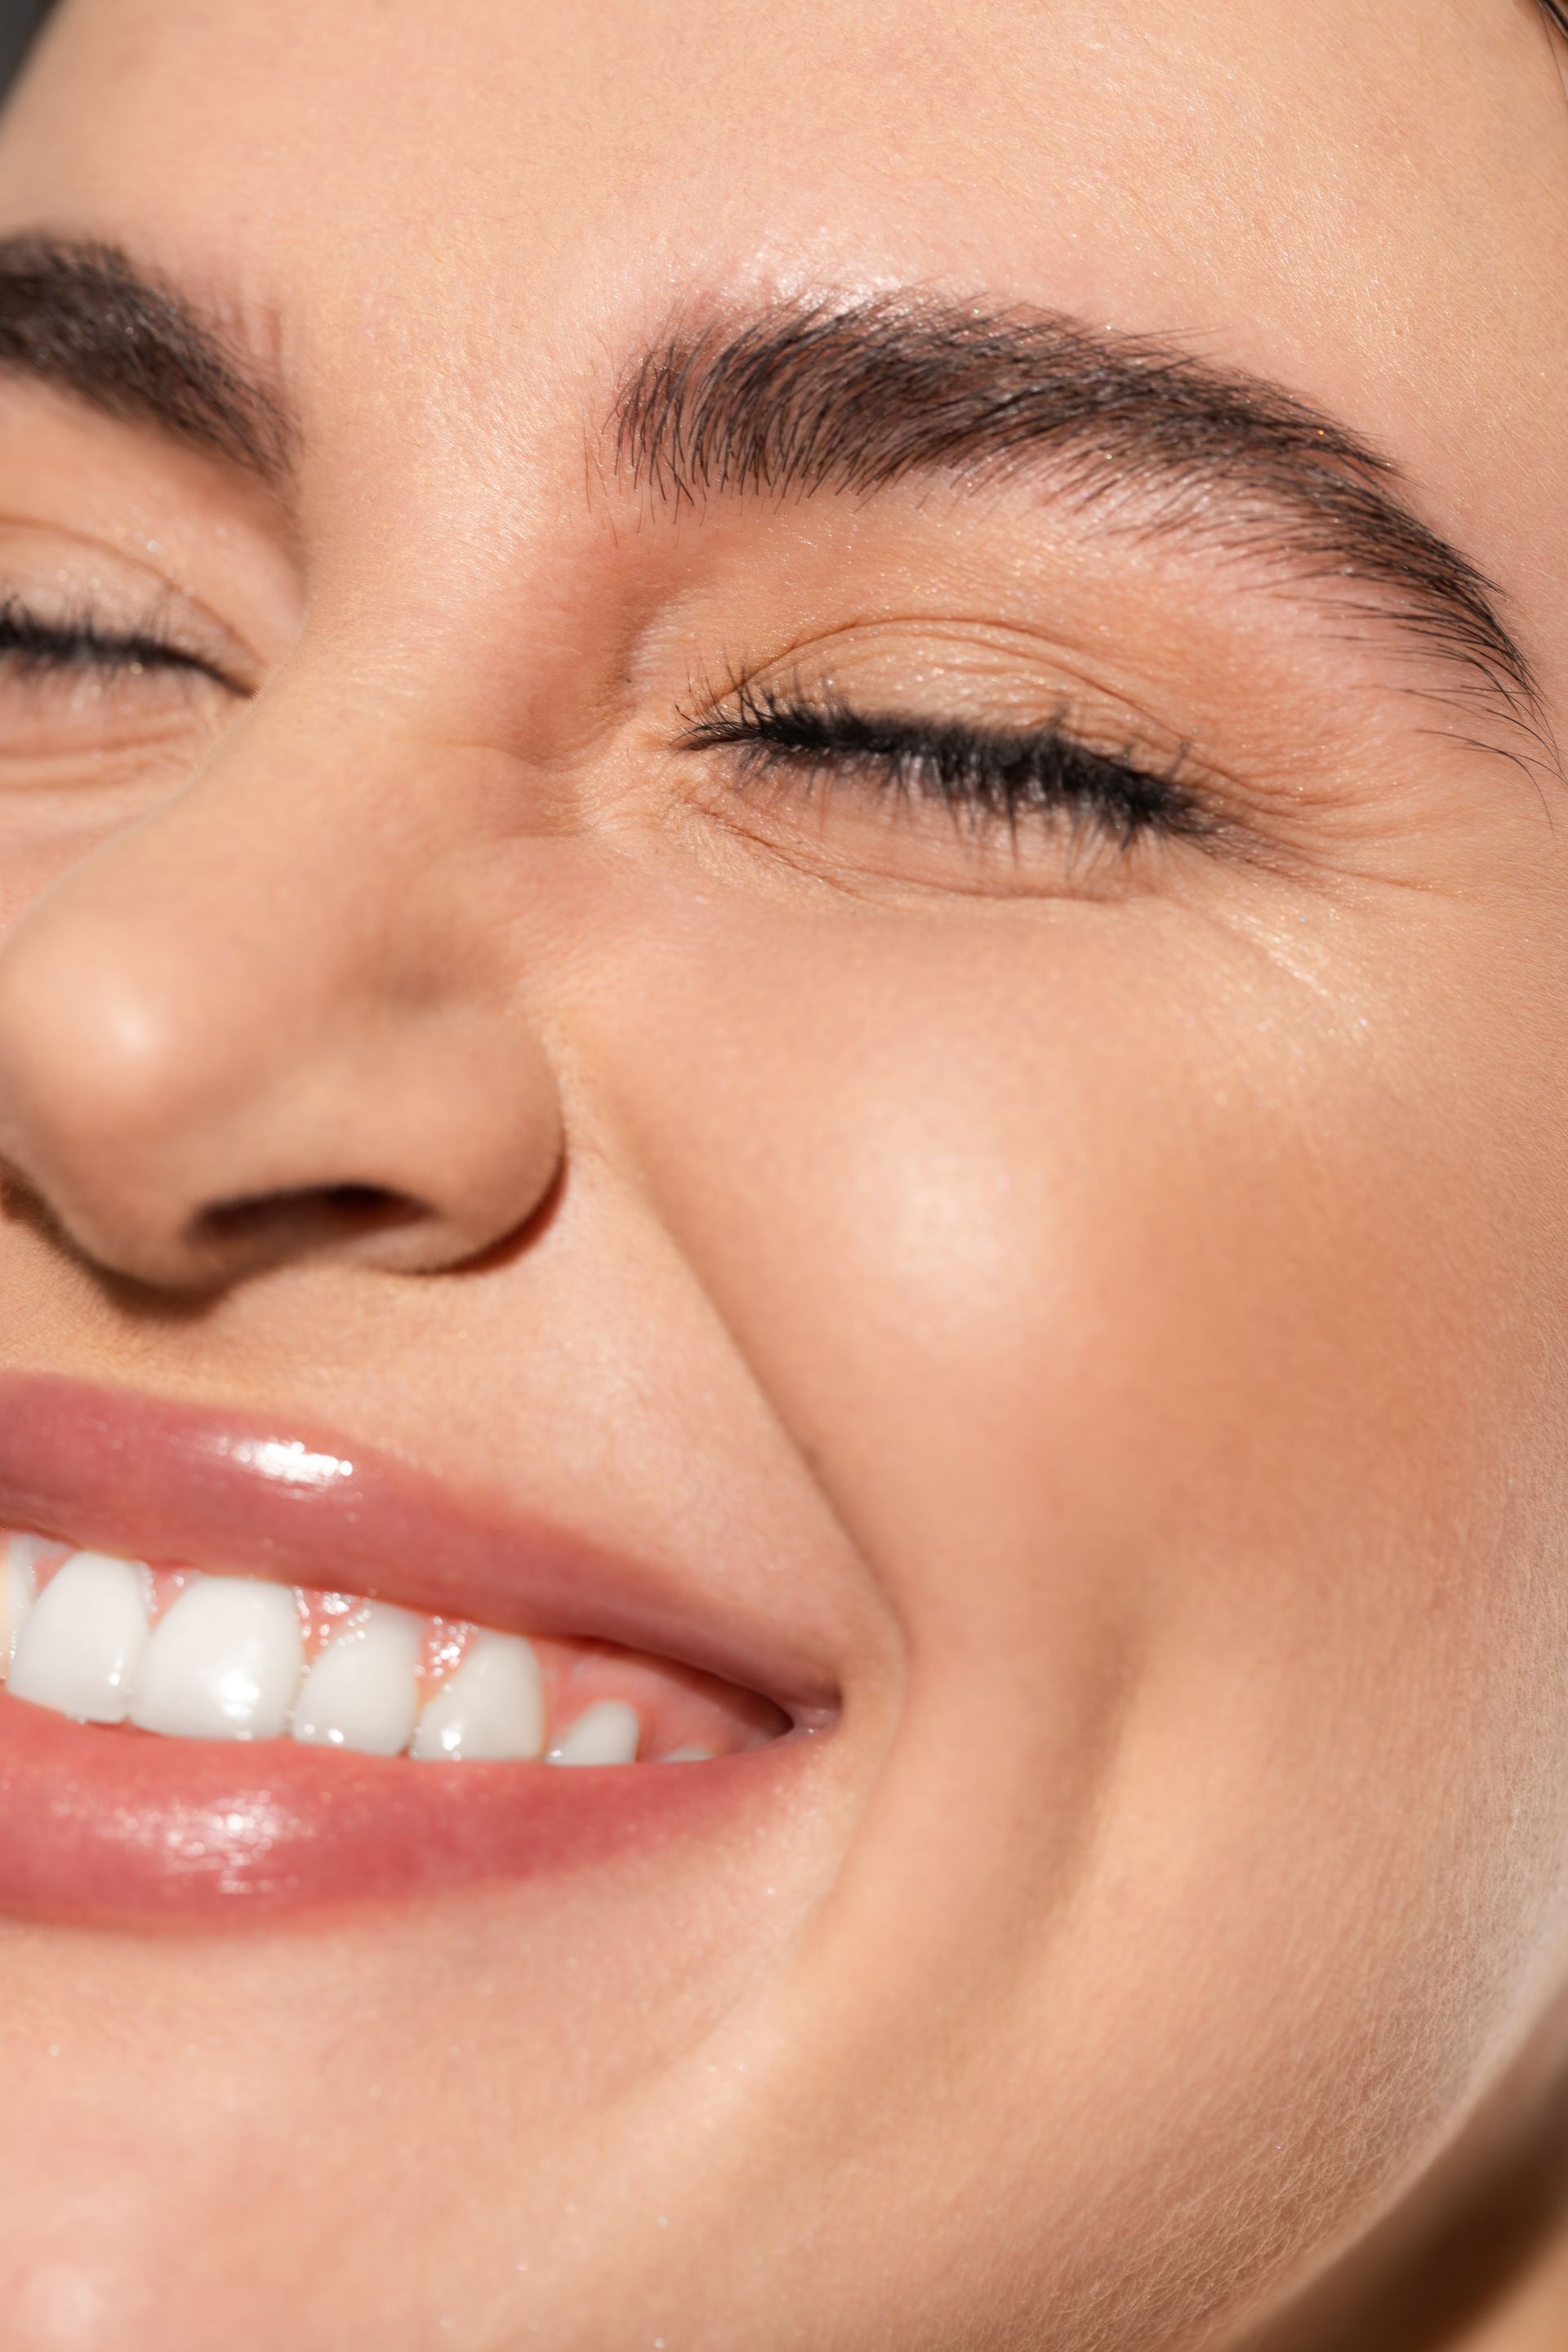 a close up of a woman 's face smiling with her eyes closed .